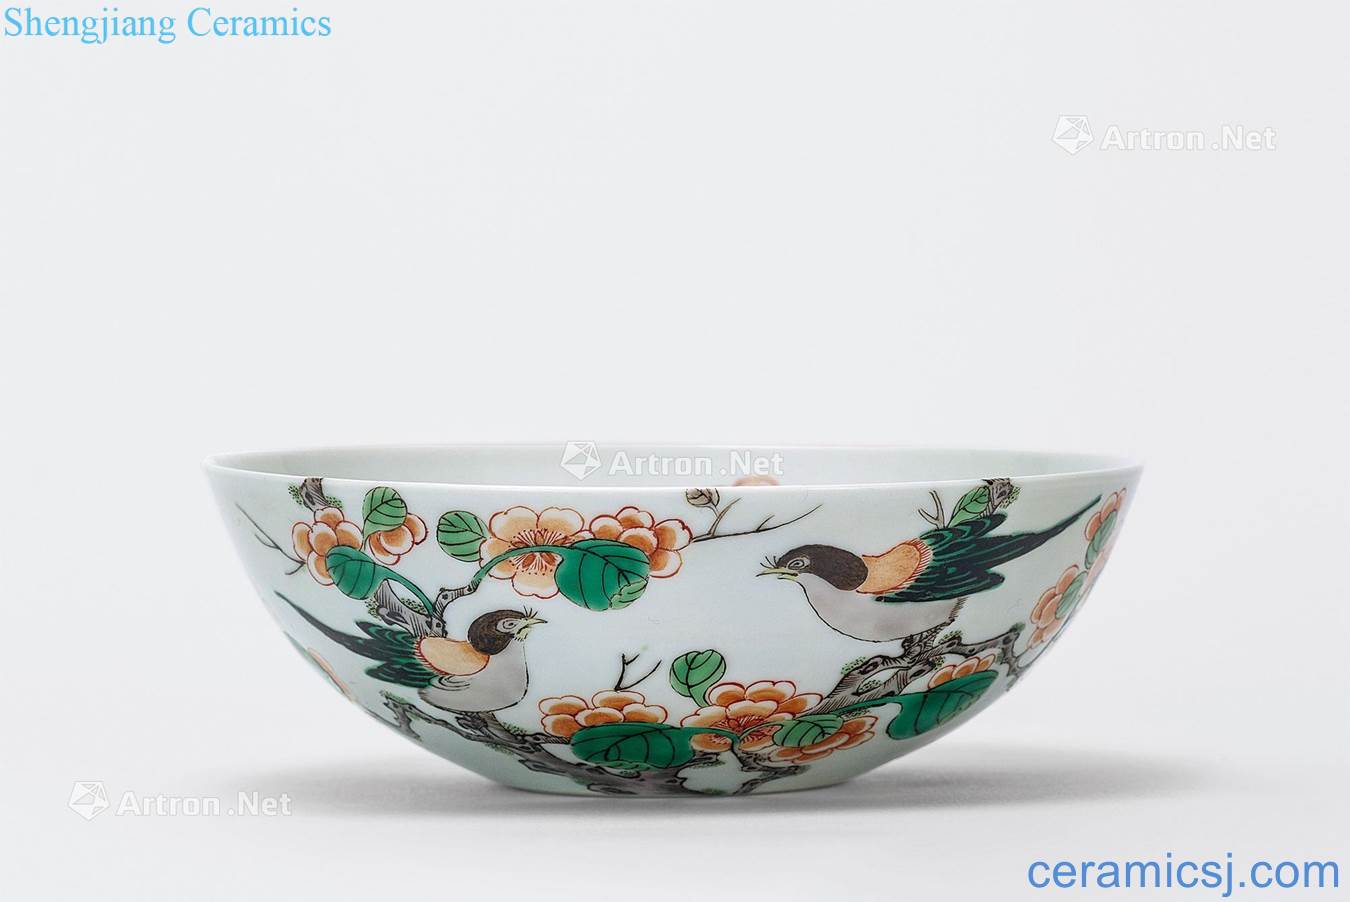 Clear colorful branches of flowers and birds lines lie the foot bowl